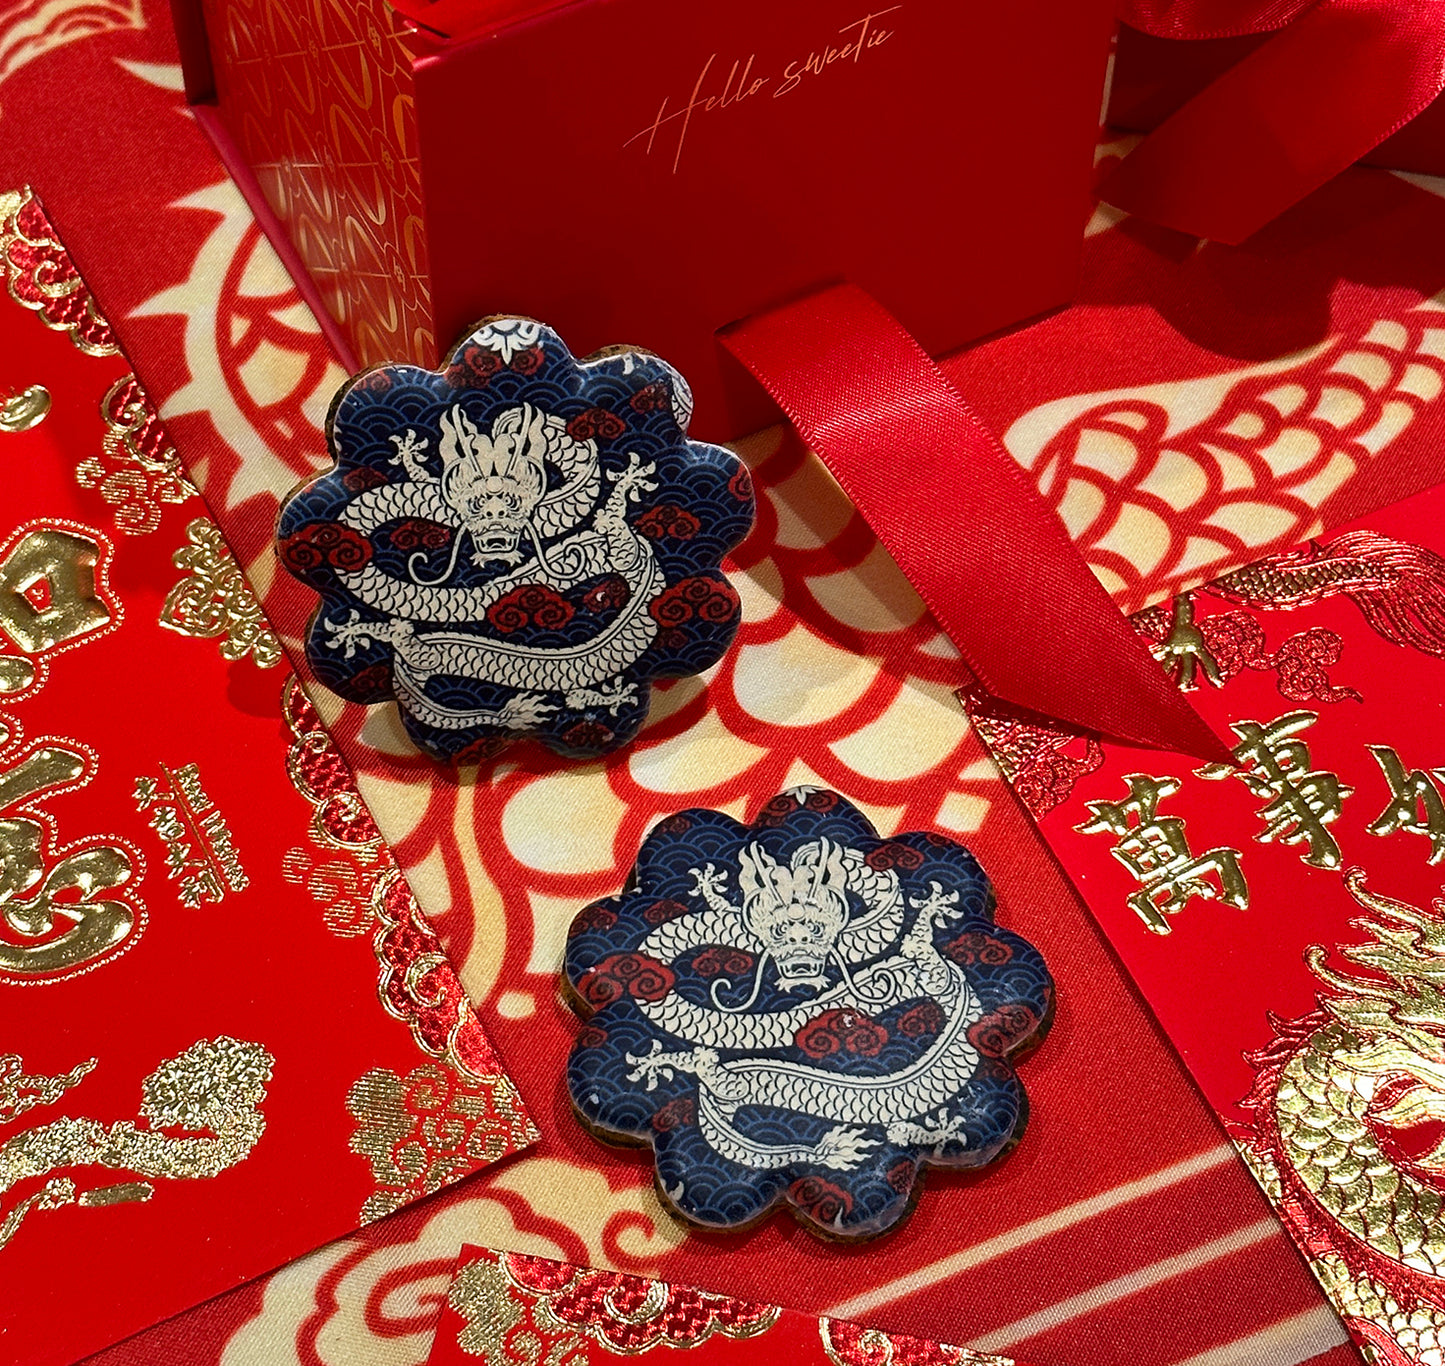 YD2 - Lunar New Year - the Dragon Speculoos biscuits with Red envelope